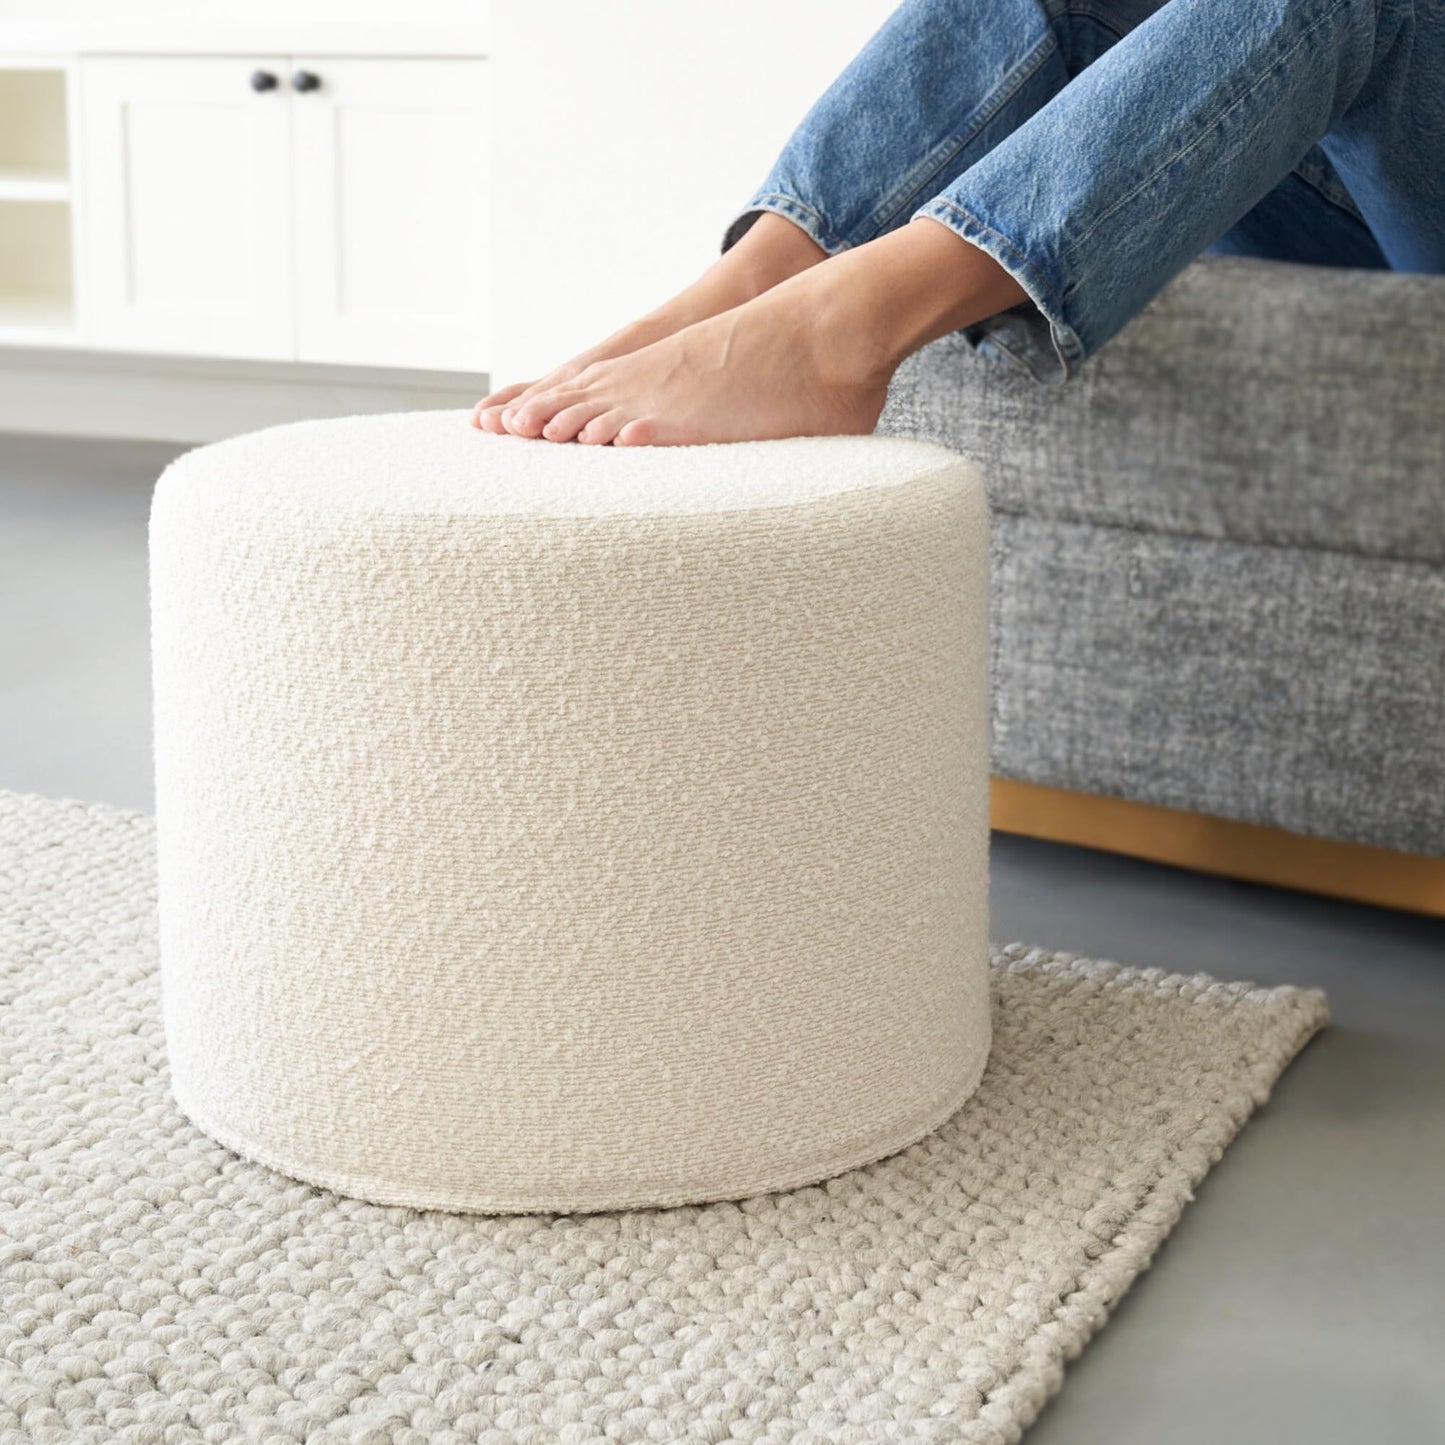 ZICOTO Beautiful Boucle Pouf Ottoman and Foot Rest - Elevate Your Living Room Decor with Lightweight Comfort and Charm - A Modern Foam Stuffed Poof Perfect to Rest Your Feet